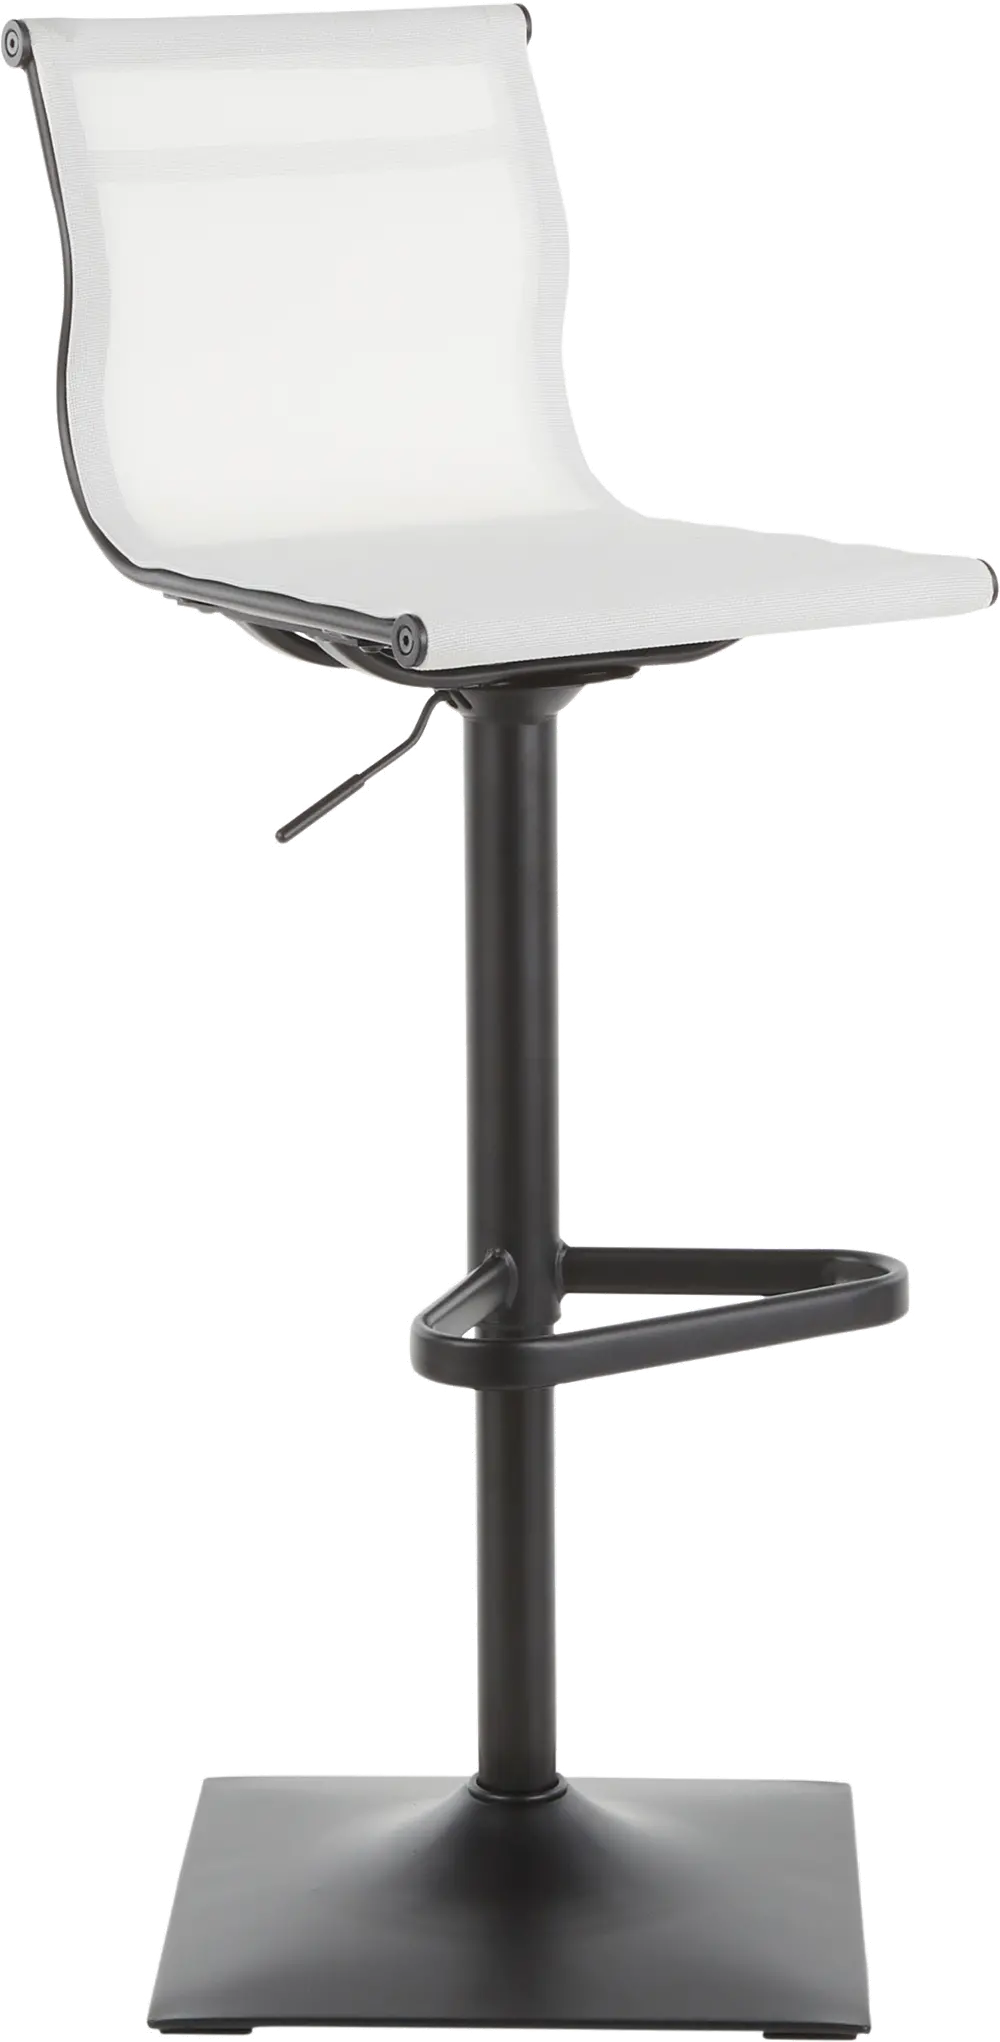 BS-MIRAGE BKW Contemporary White and Black Adjustable Bar Stool - Mirage-1